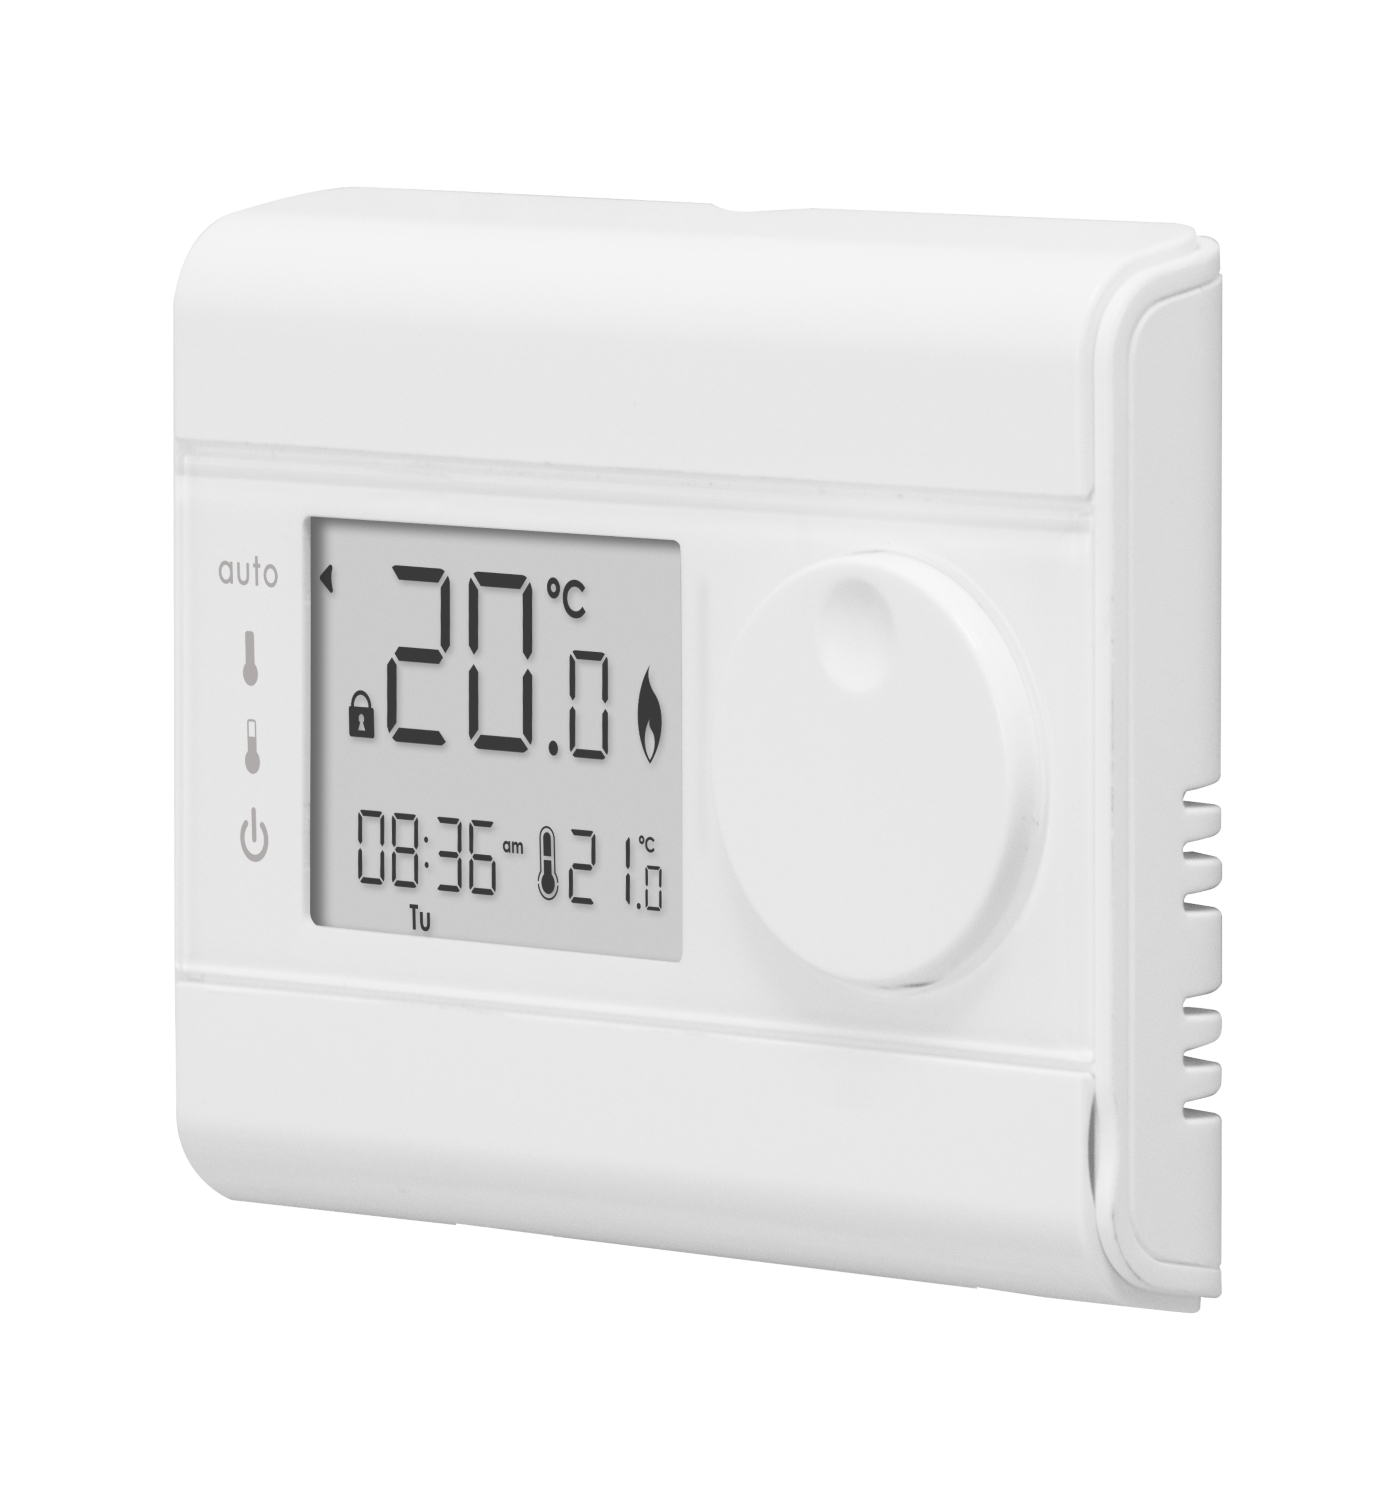  Thermostat d'ambiance digital programmable 